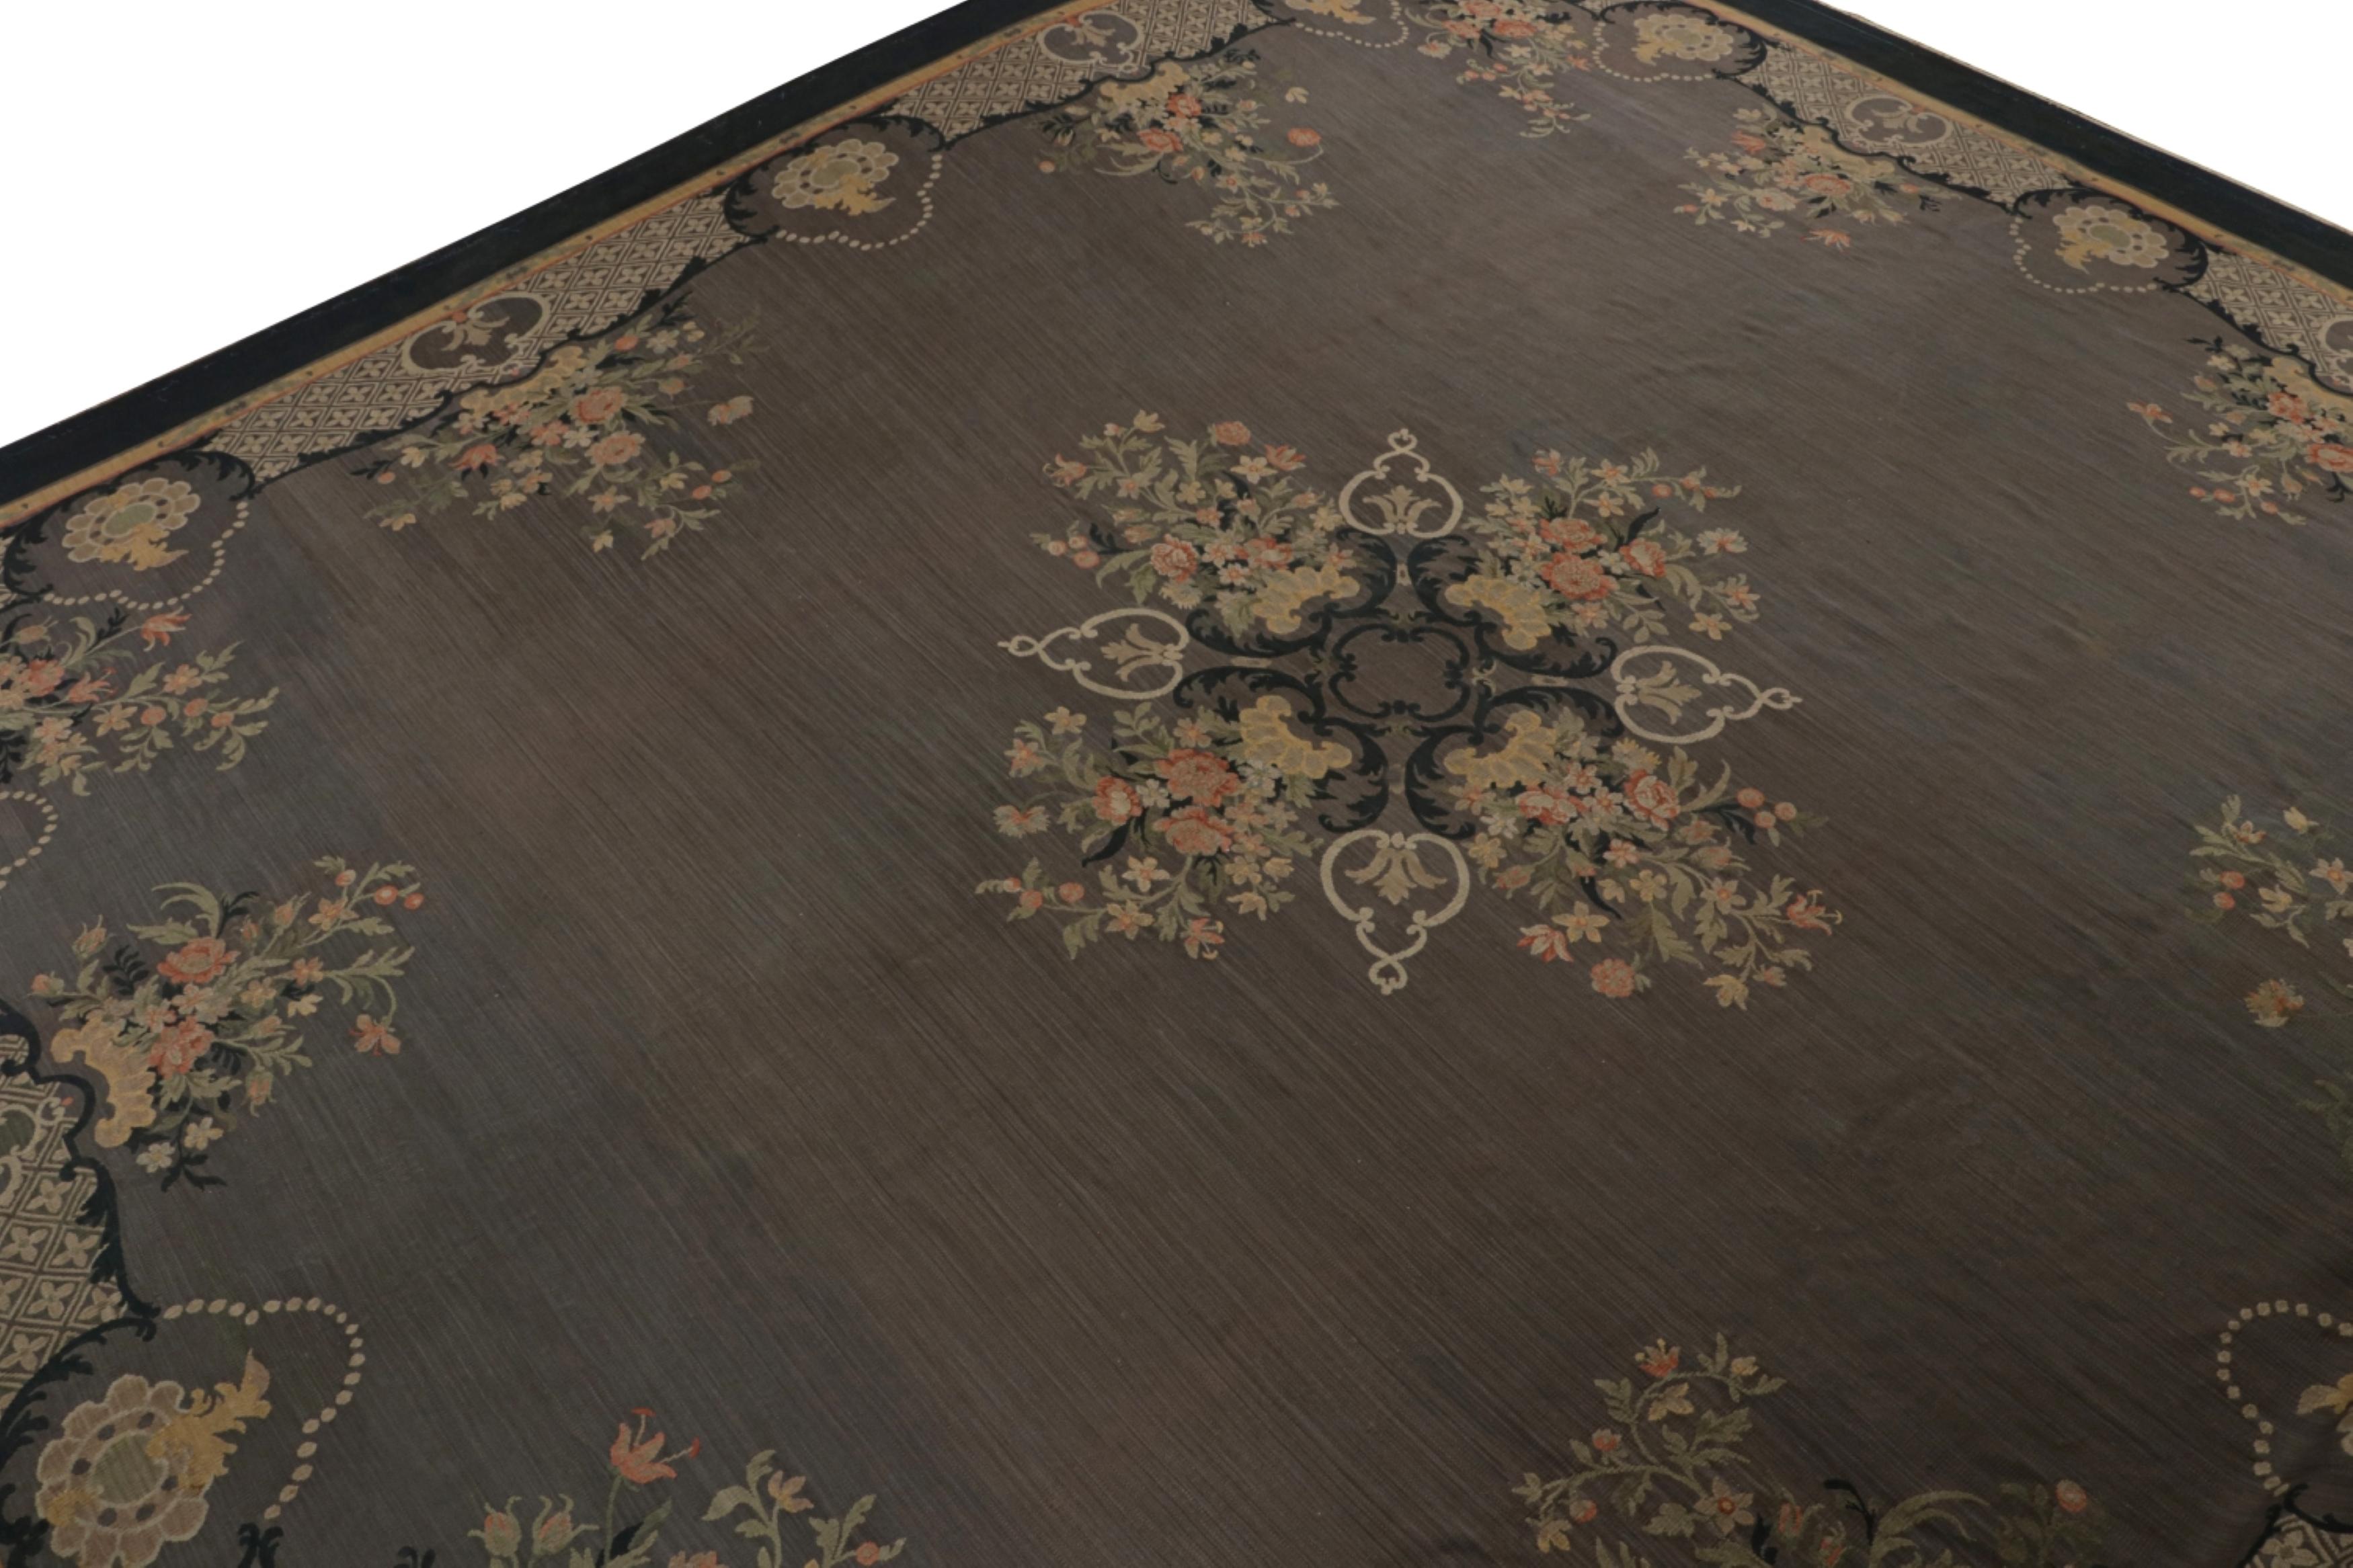 Handwoven in wool and hailing from France circa 1890-1900, this 17x19 antique Aubusson flatweave rug in gray features transitional French designs and Persian rug sensibilities of the Bidjar tradition. Its design is symbolic of the inspiration